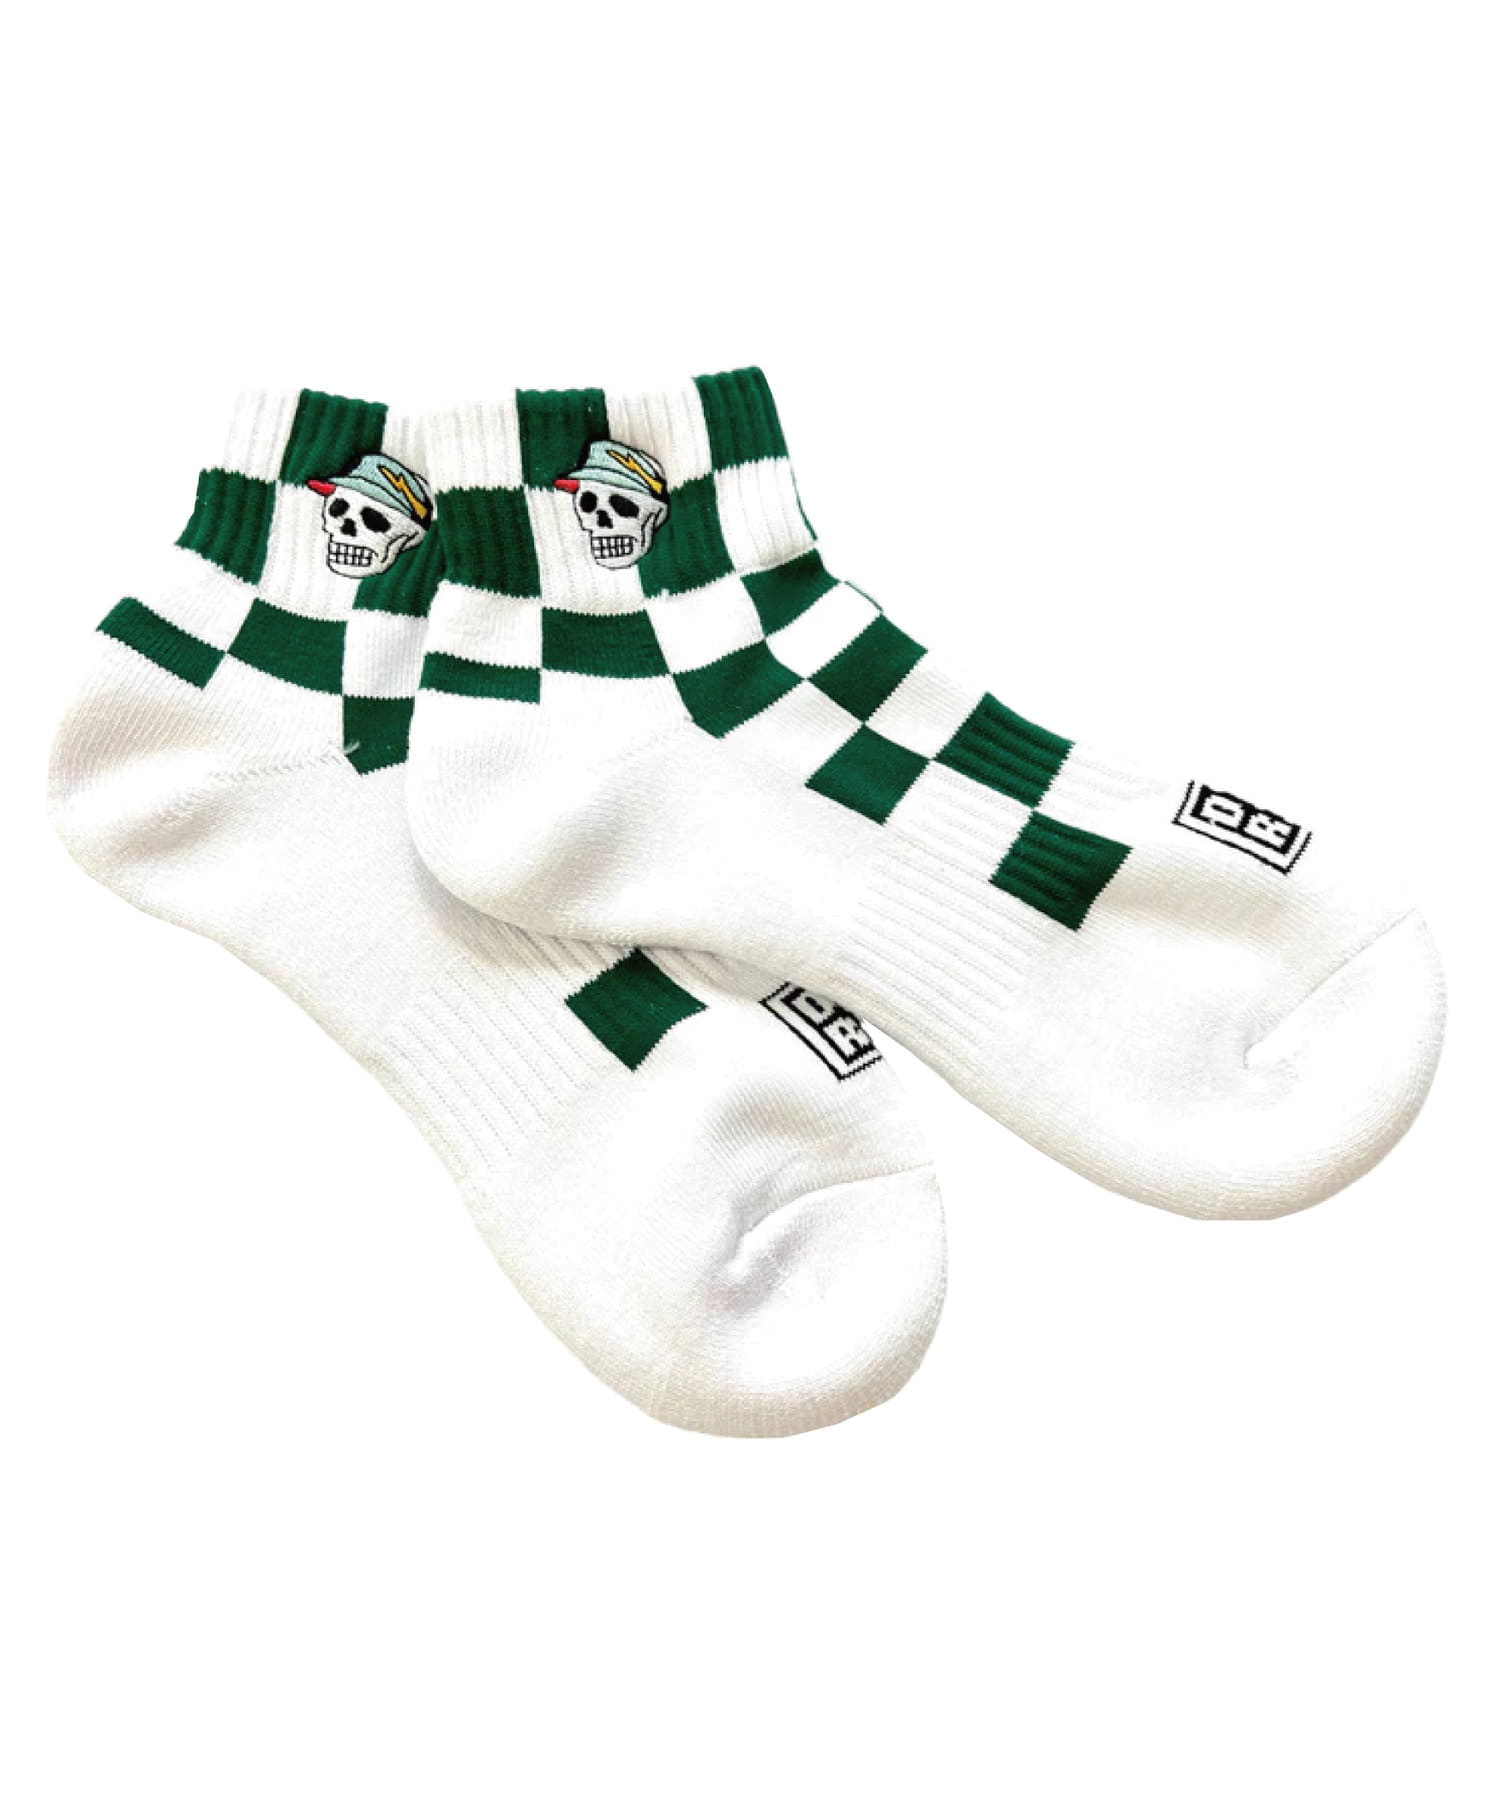 twoles(トゥレス) 【DEVEREUX GOLF】Checked Ankle Socks